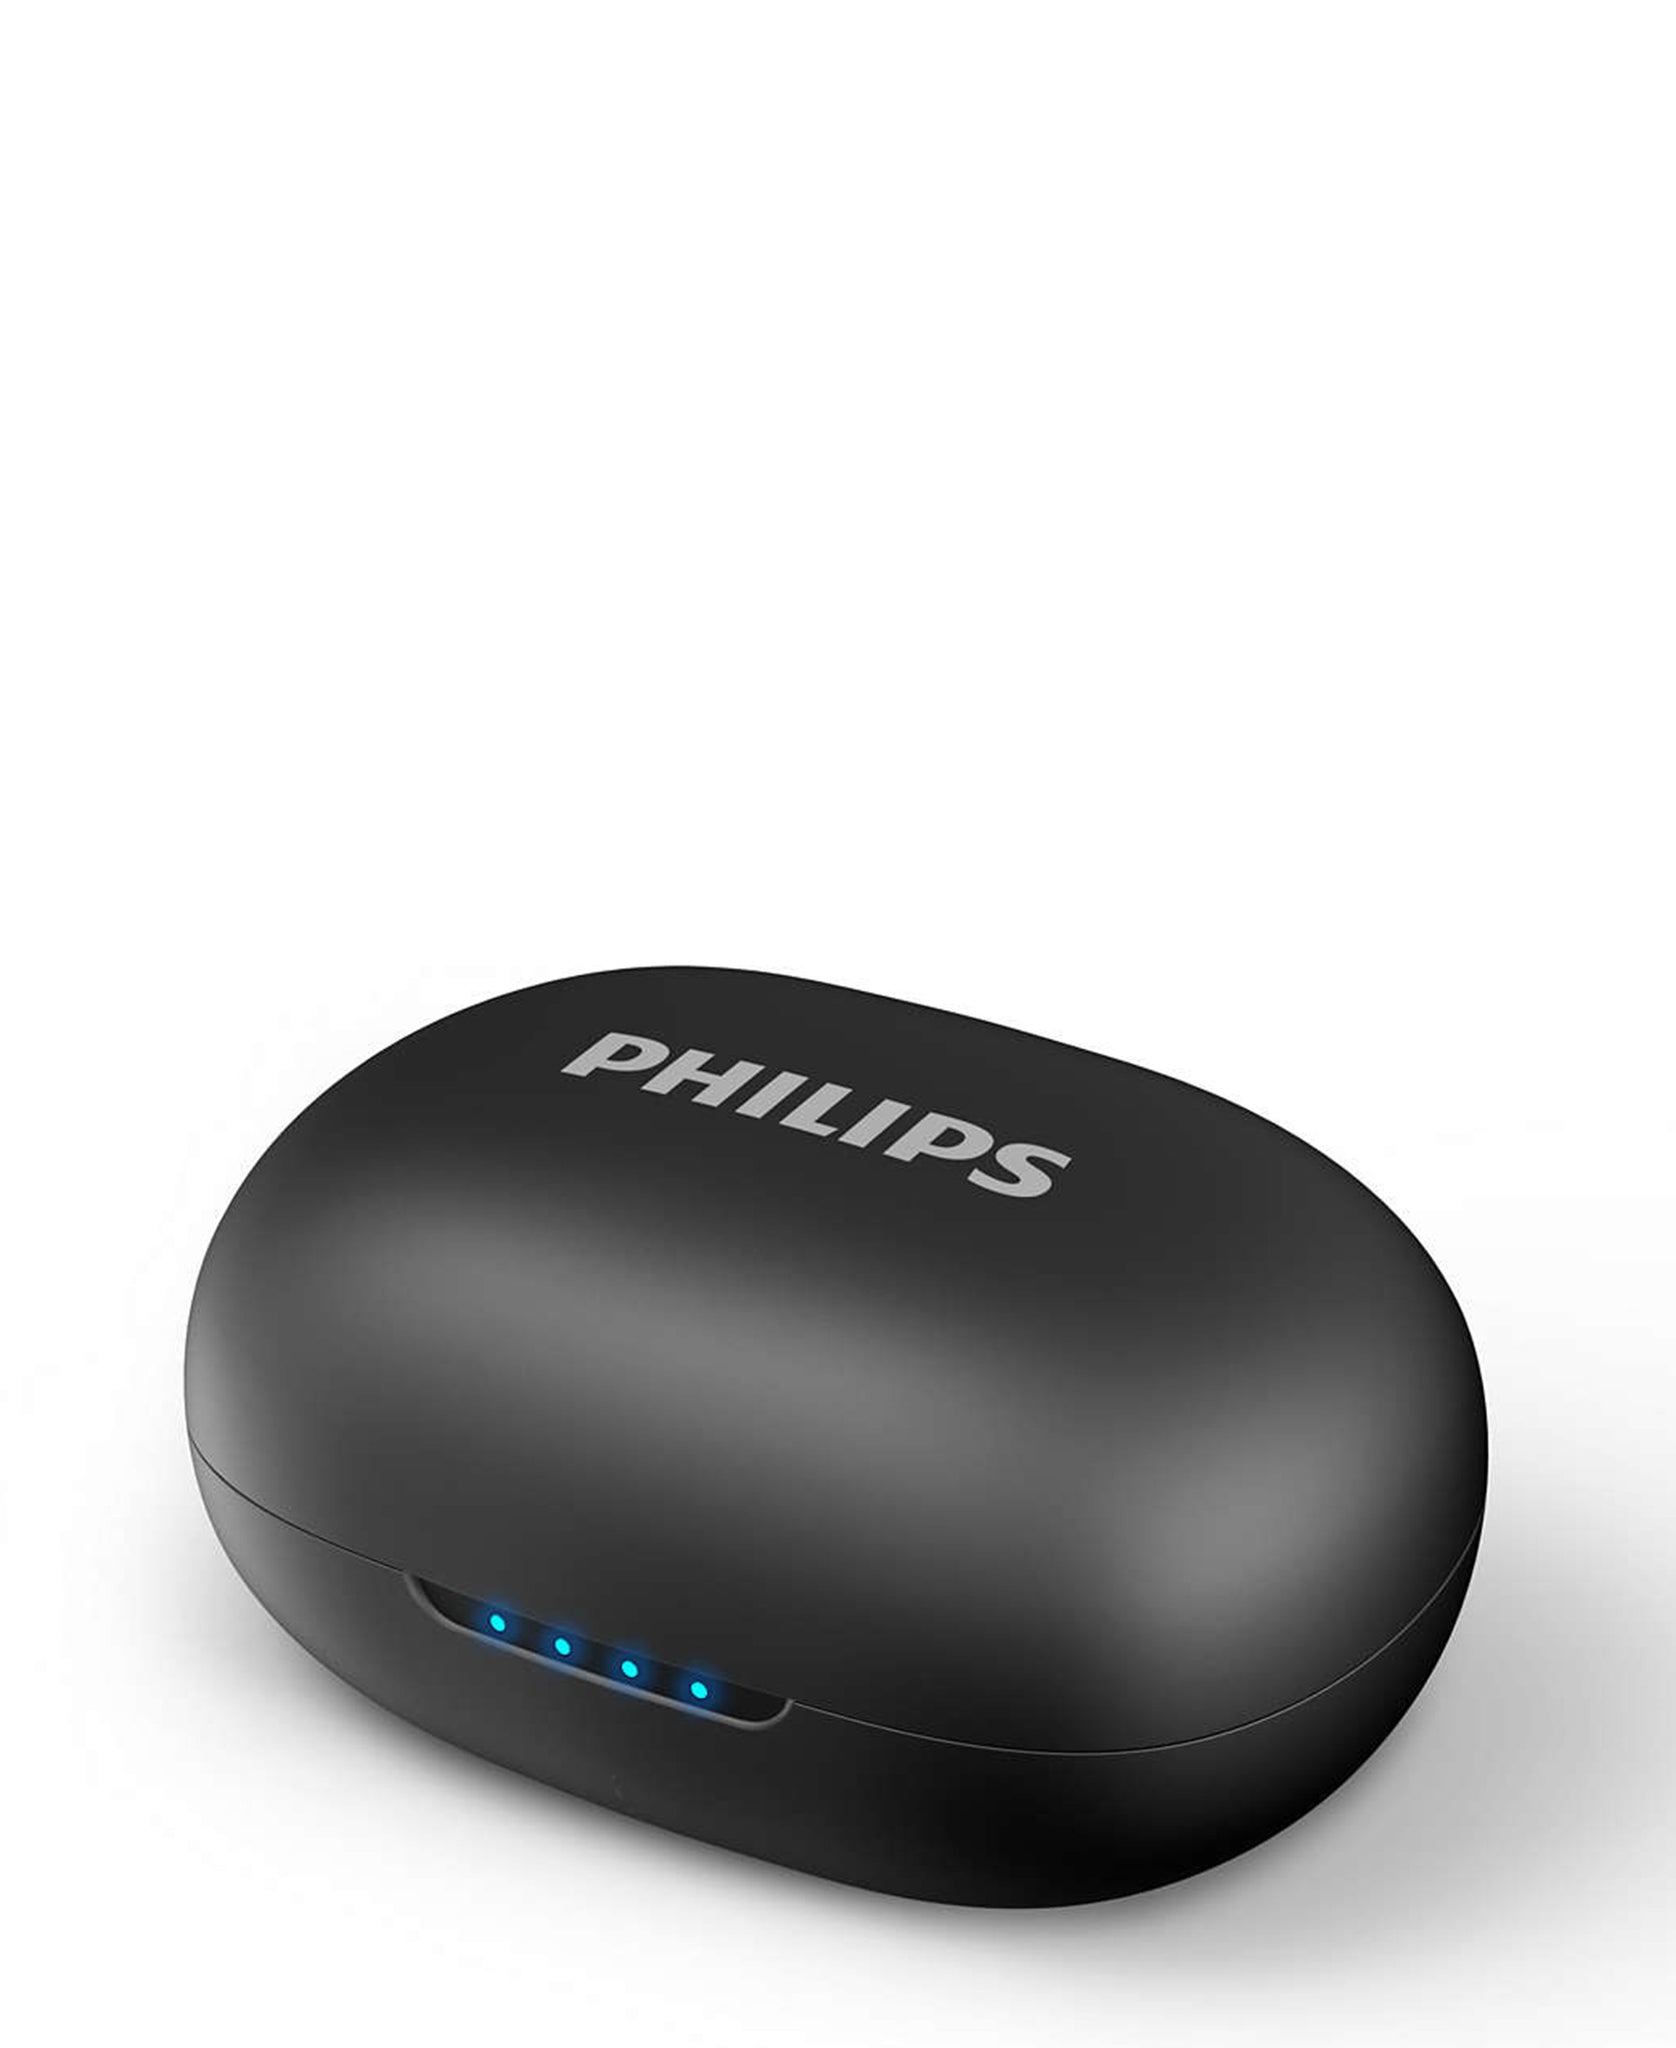 Phillps Wireless Airpods - Black